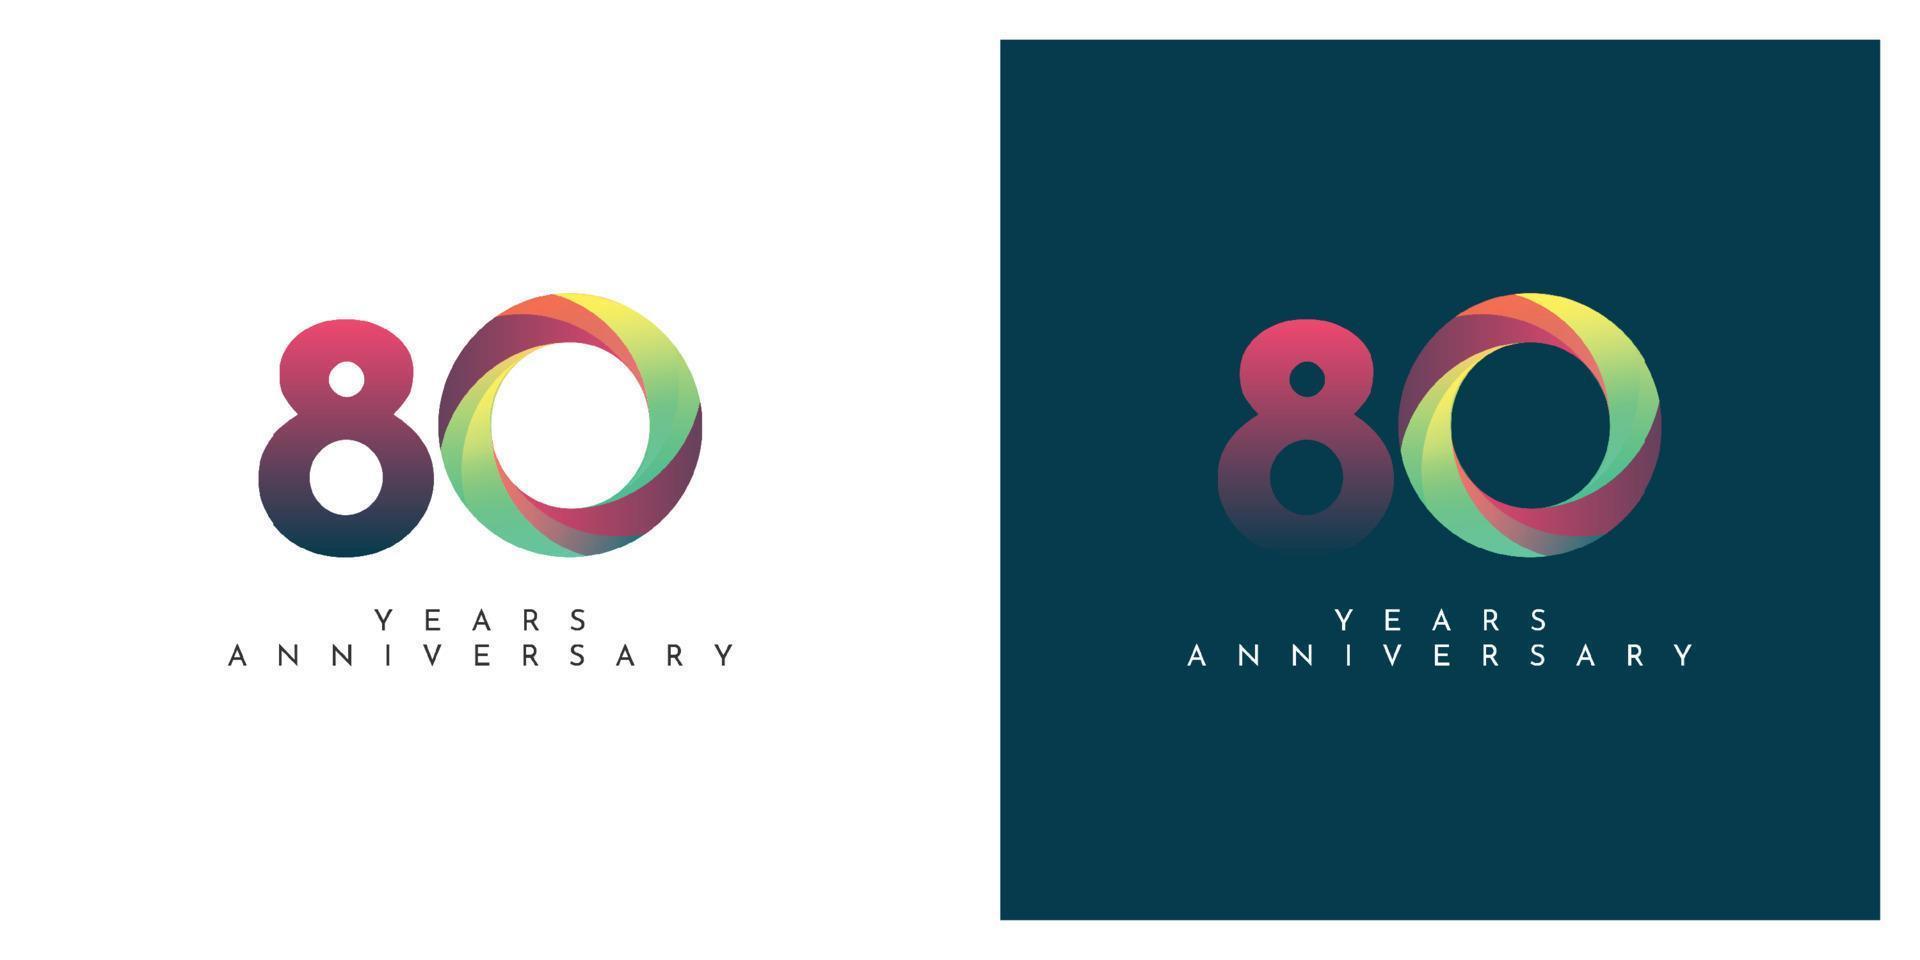 80 Years anniversary  colorful abstract design vector